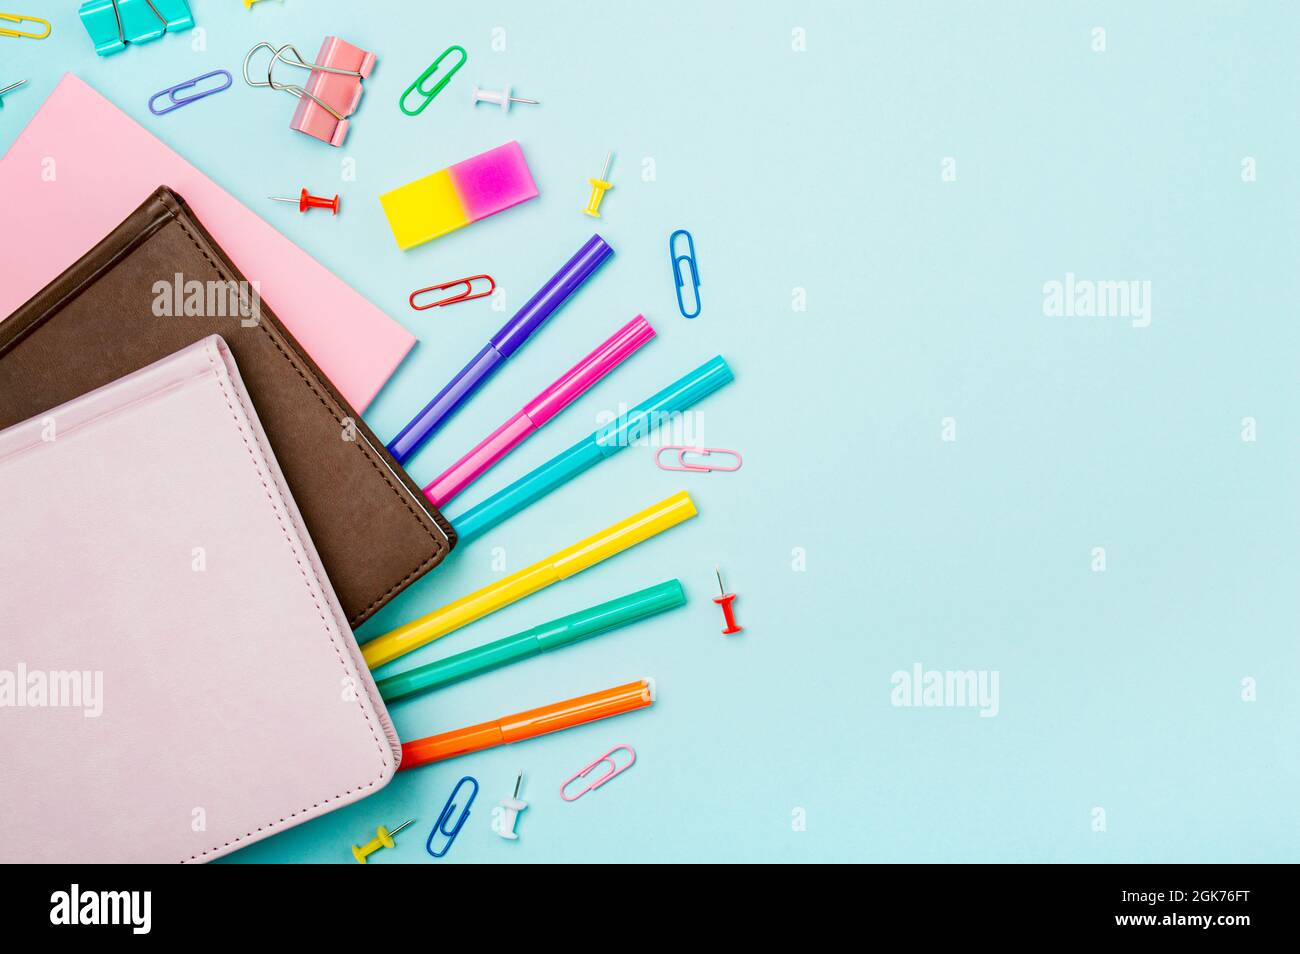 School supplies, stationery accessories on blue background. Copy space. Top view flat lay. Education, back to school, freelancer work concept. Long horizontal banner Stock Photo